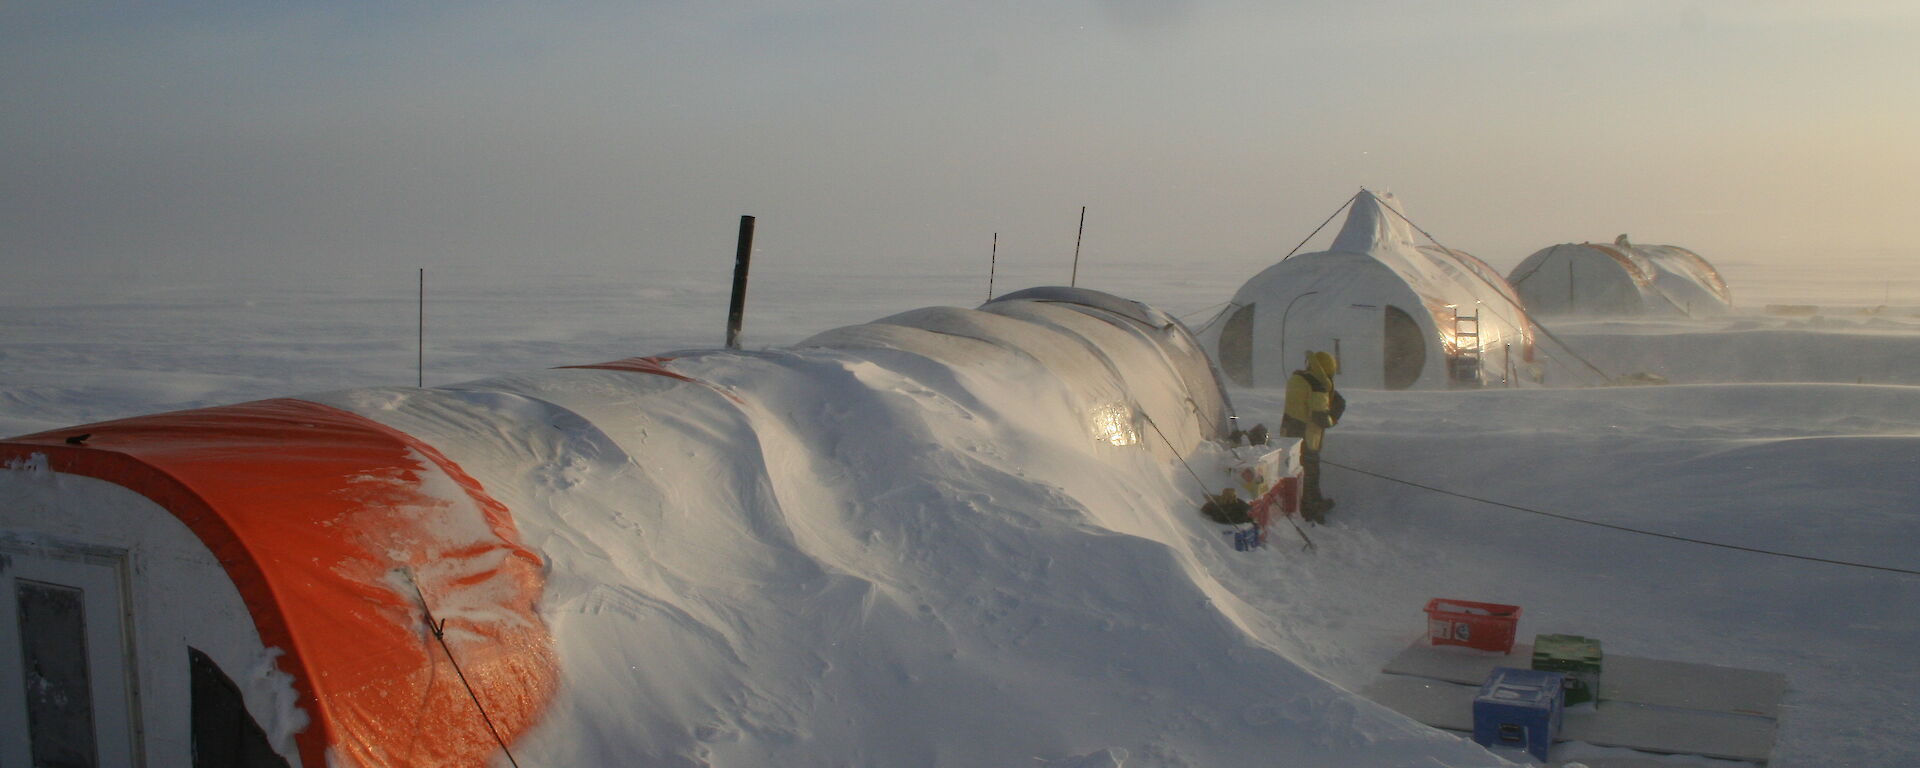 Australian ice core drilling camp after a week-long blizzard, Law Dome, Antarctica.